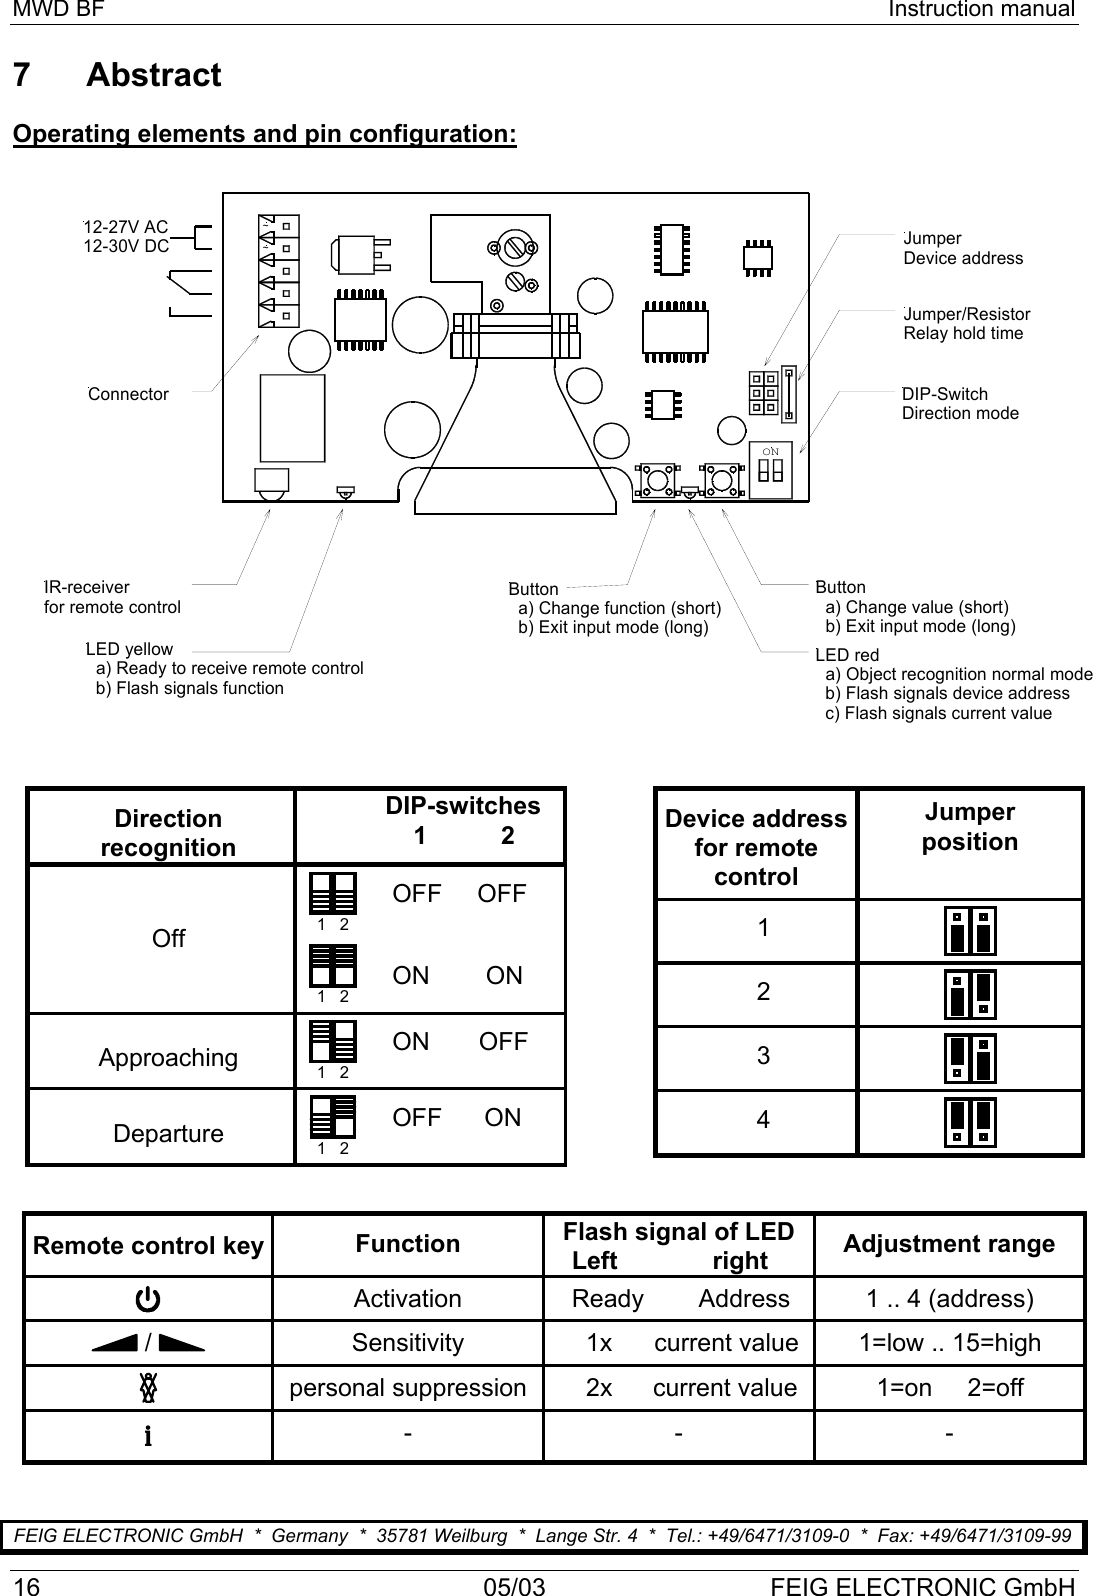 MWD BF Instruction manual16 05/03 FEIG ELECTRONIC GmbH7 AbstractOperating elements and pin configuration:Button  a) Change function (short)  b) Exit input mode (long)LED yellow  a) Ready to receive remote control  b) Flash signals functionIR-receiverfor remote controlConnector12-27V AC12-30V DC~~DIP-SwitchDirection modeONButton  a) Change value (short)  b) Exit input mode (long)LED red  a) Object recognition normal mode  b) Flash signals device address  c) Flash signals current valueJumperDevice addressJumper/ResistorRelay hold time Device addressfor remotecontrolJumperposition1234Remote control key Function Flash signal of LED   Left    right Adjustment rangeActivation    Ready   Address 1 .. 4 (address) /  Sensitivity      1x      current value 1=low .. 15=highpersonal suppression      2x     current value 1=on     2=offi---Directionrecognition DIP-switches     1        2Off 1   21   2  OFF     OFF  ON        ONApproaching 1   2  ON       OFFDeparture 1   2  OFF      ONFEIG ELECTRONIC GmbH  *  Germany  *  35781 Weilburg  *  Lange Str. 4  *  Tel.: +49/6471/3109-0  *  Fax: +49/6471/3109-99